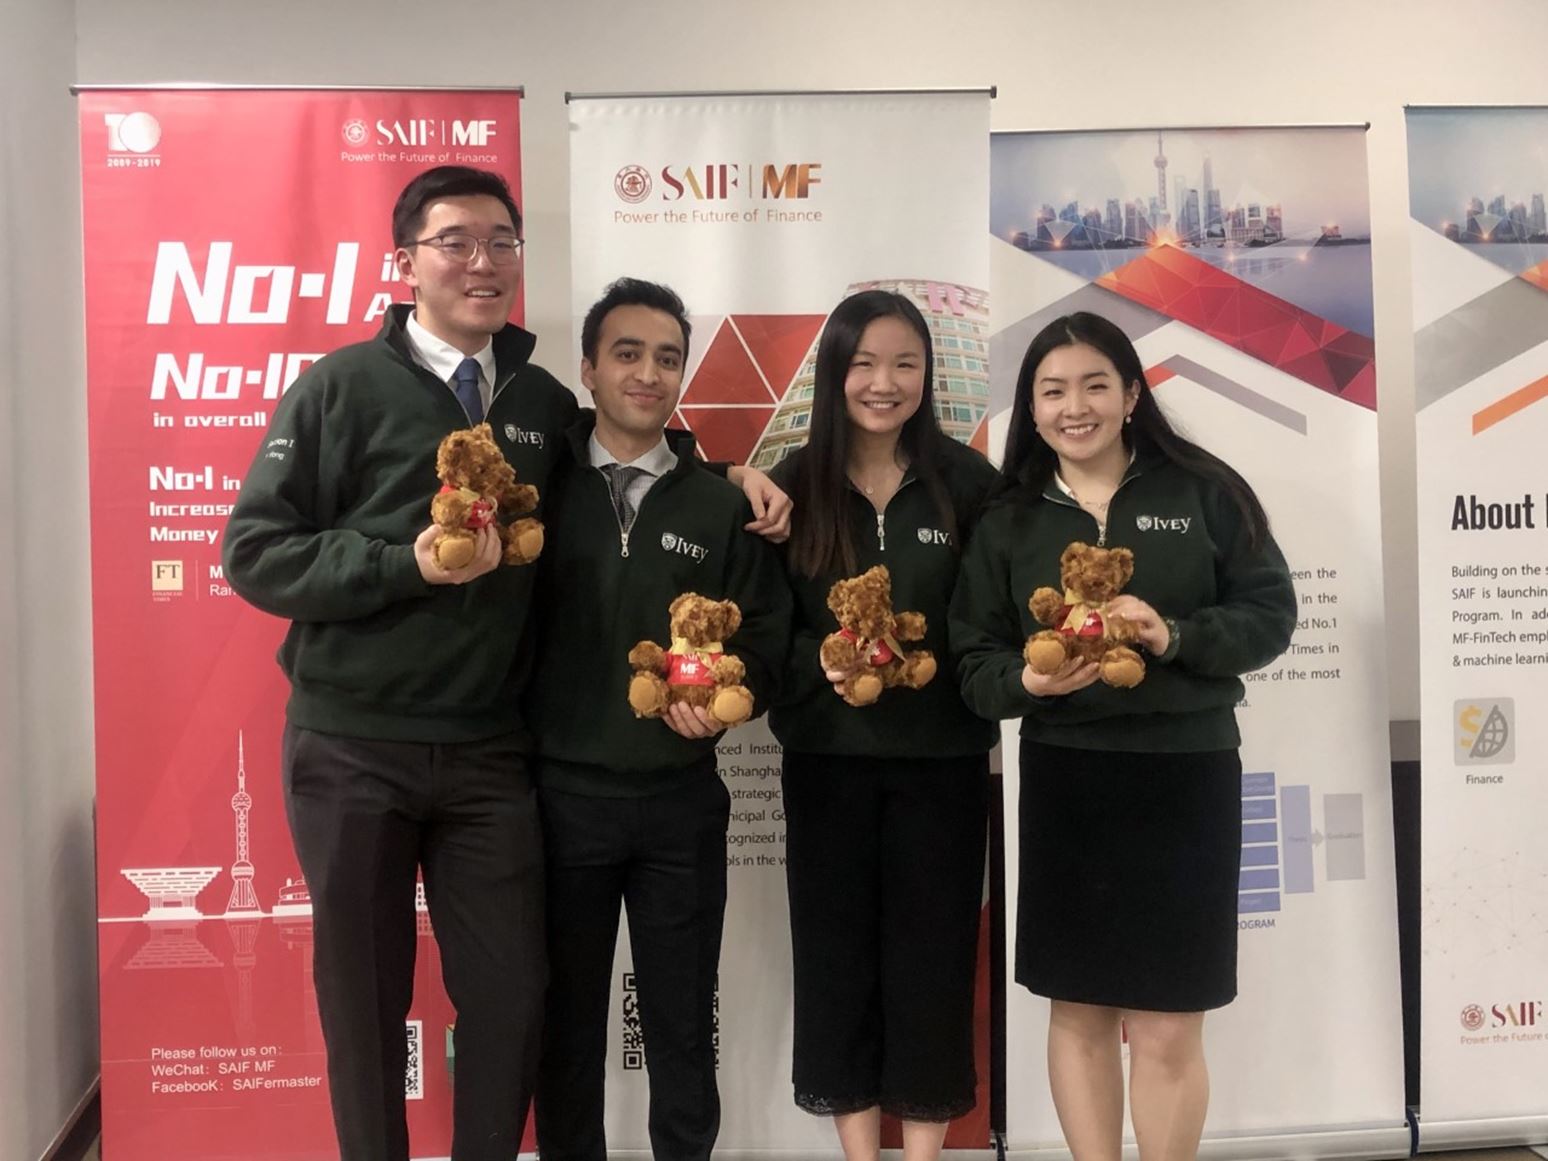 Shanghai case competition award winners